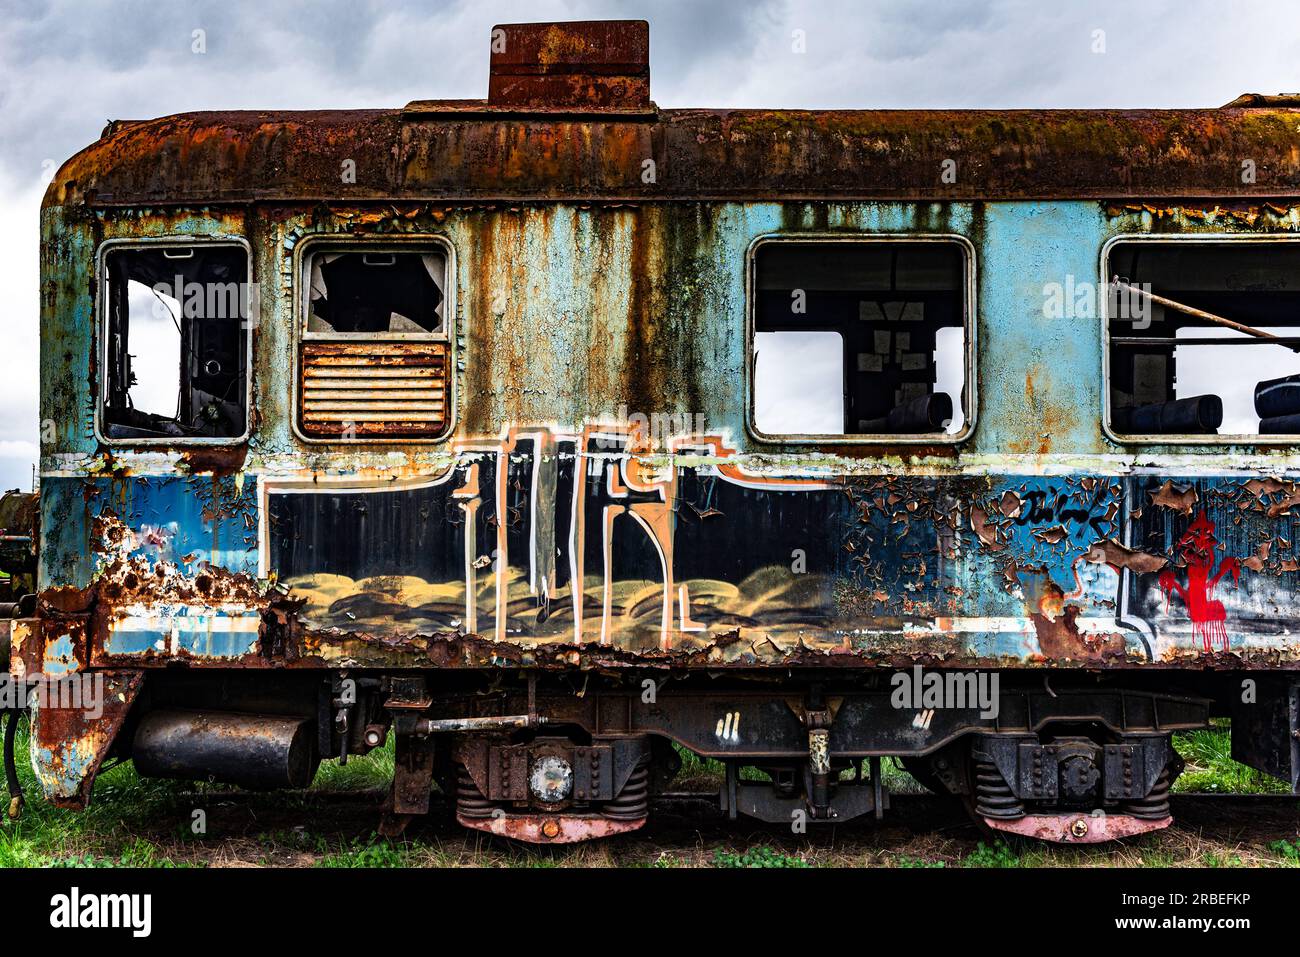 Old rusty electric multiple unit train decommissioned and abandoned on railway siding on green grassy field Stock Photo